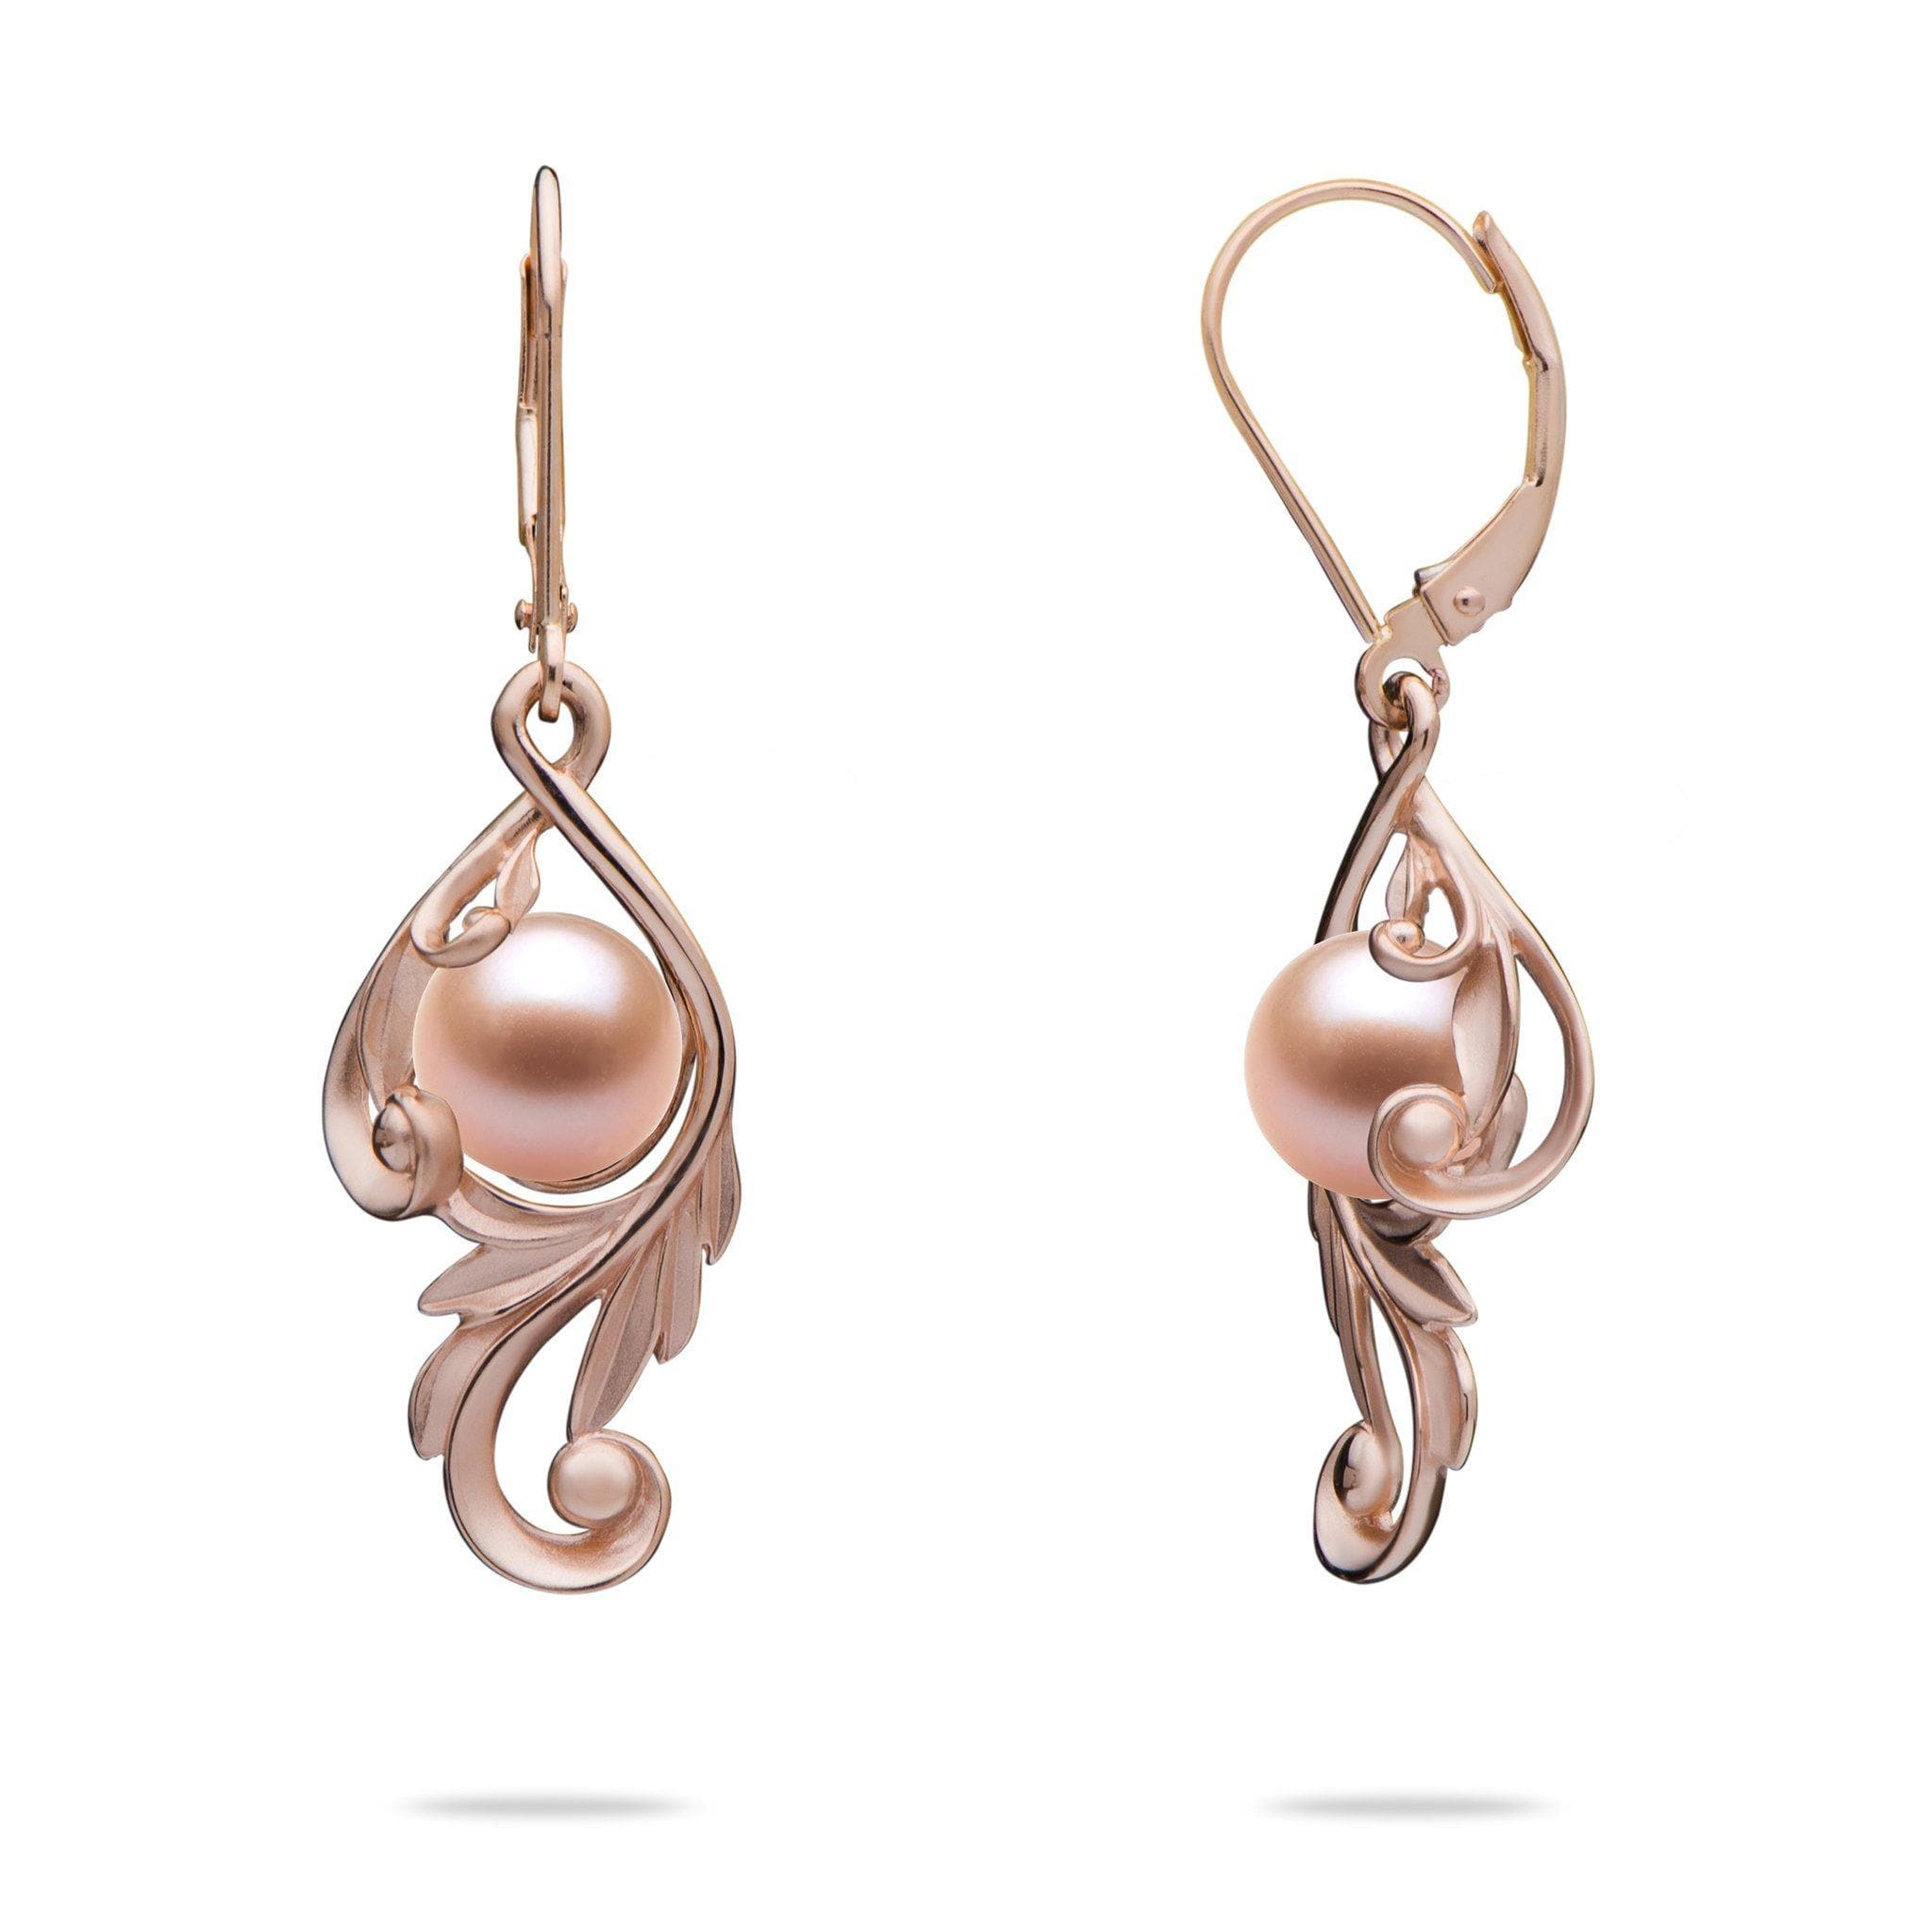 Maile Scroll Earring Mountings in 14k Rose Gold - Maui Divers Jewelry